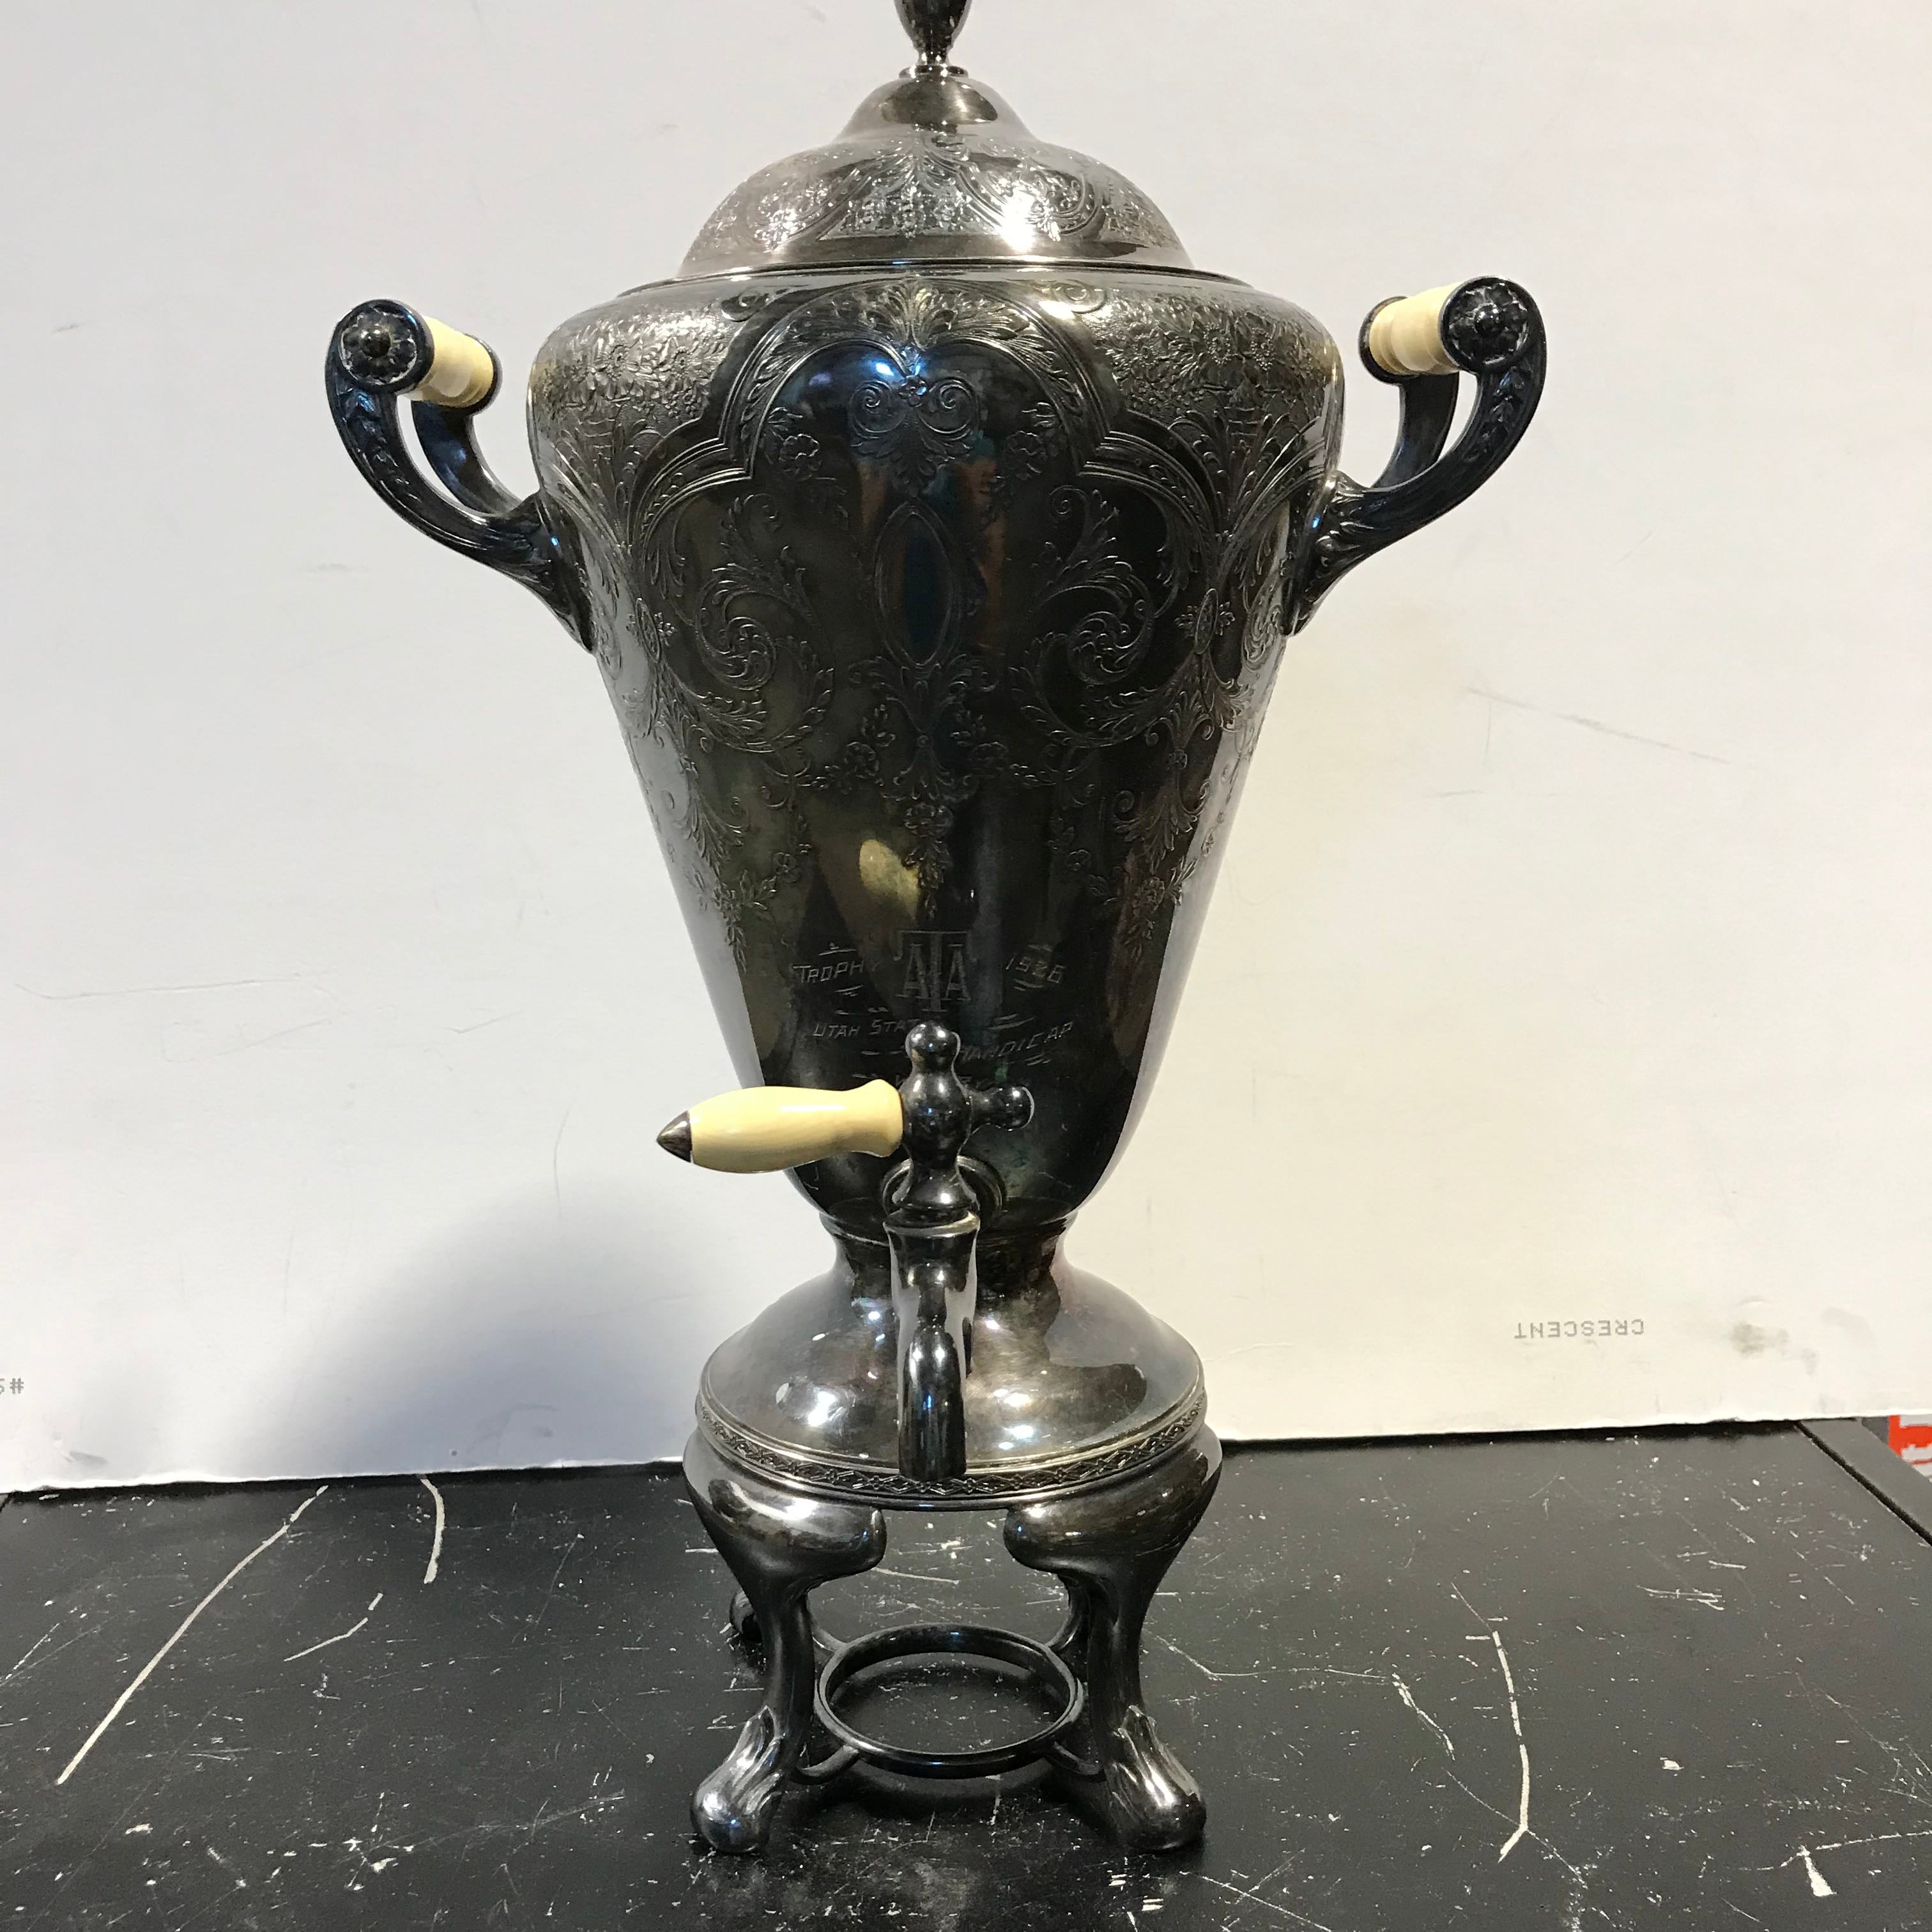 16.5"x 9.5" International S.Co. Wilcox S.P.Co Eclectic Coffee Urn "Utah State Trophy"